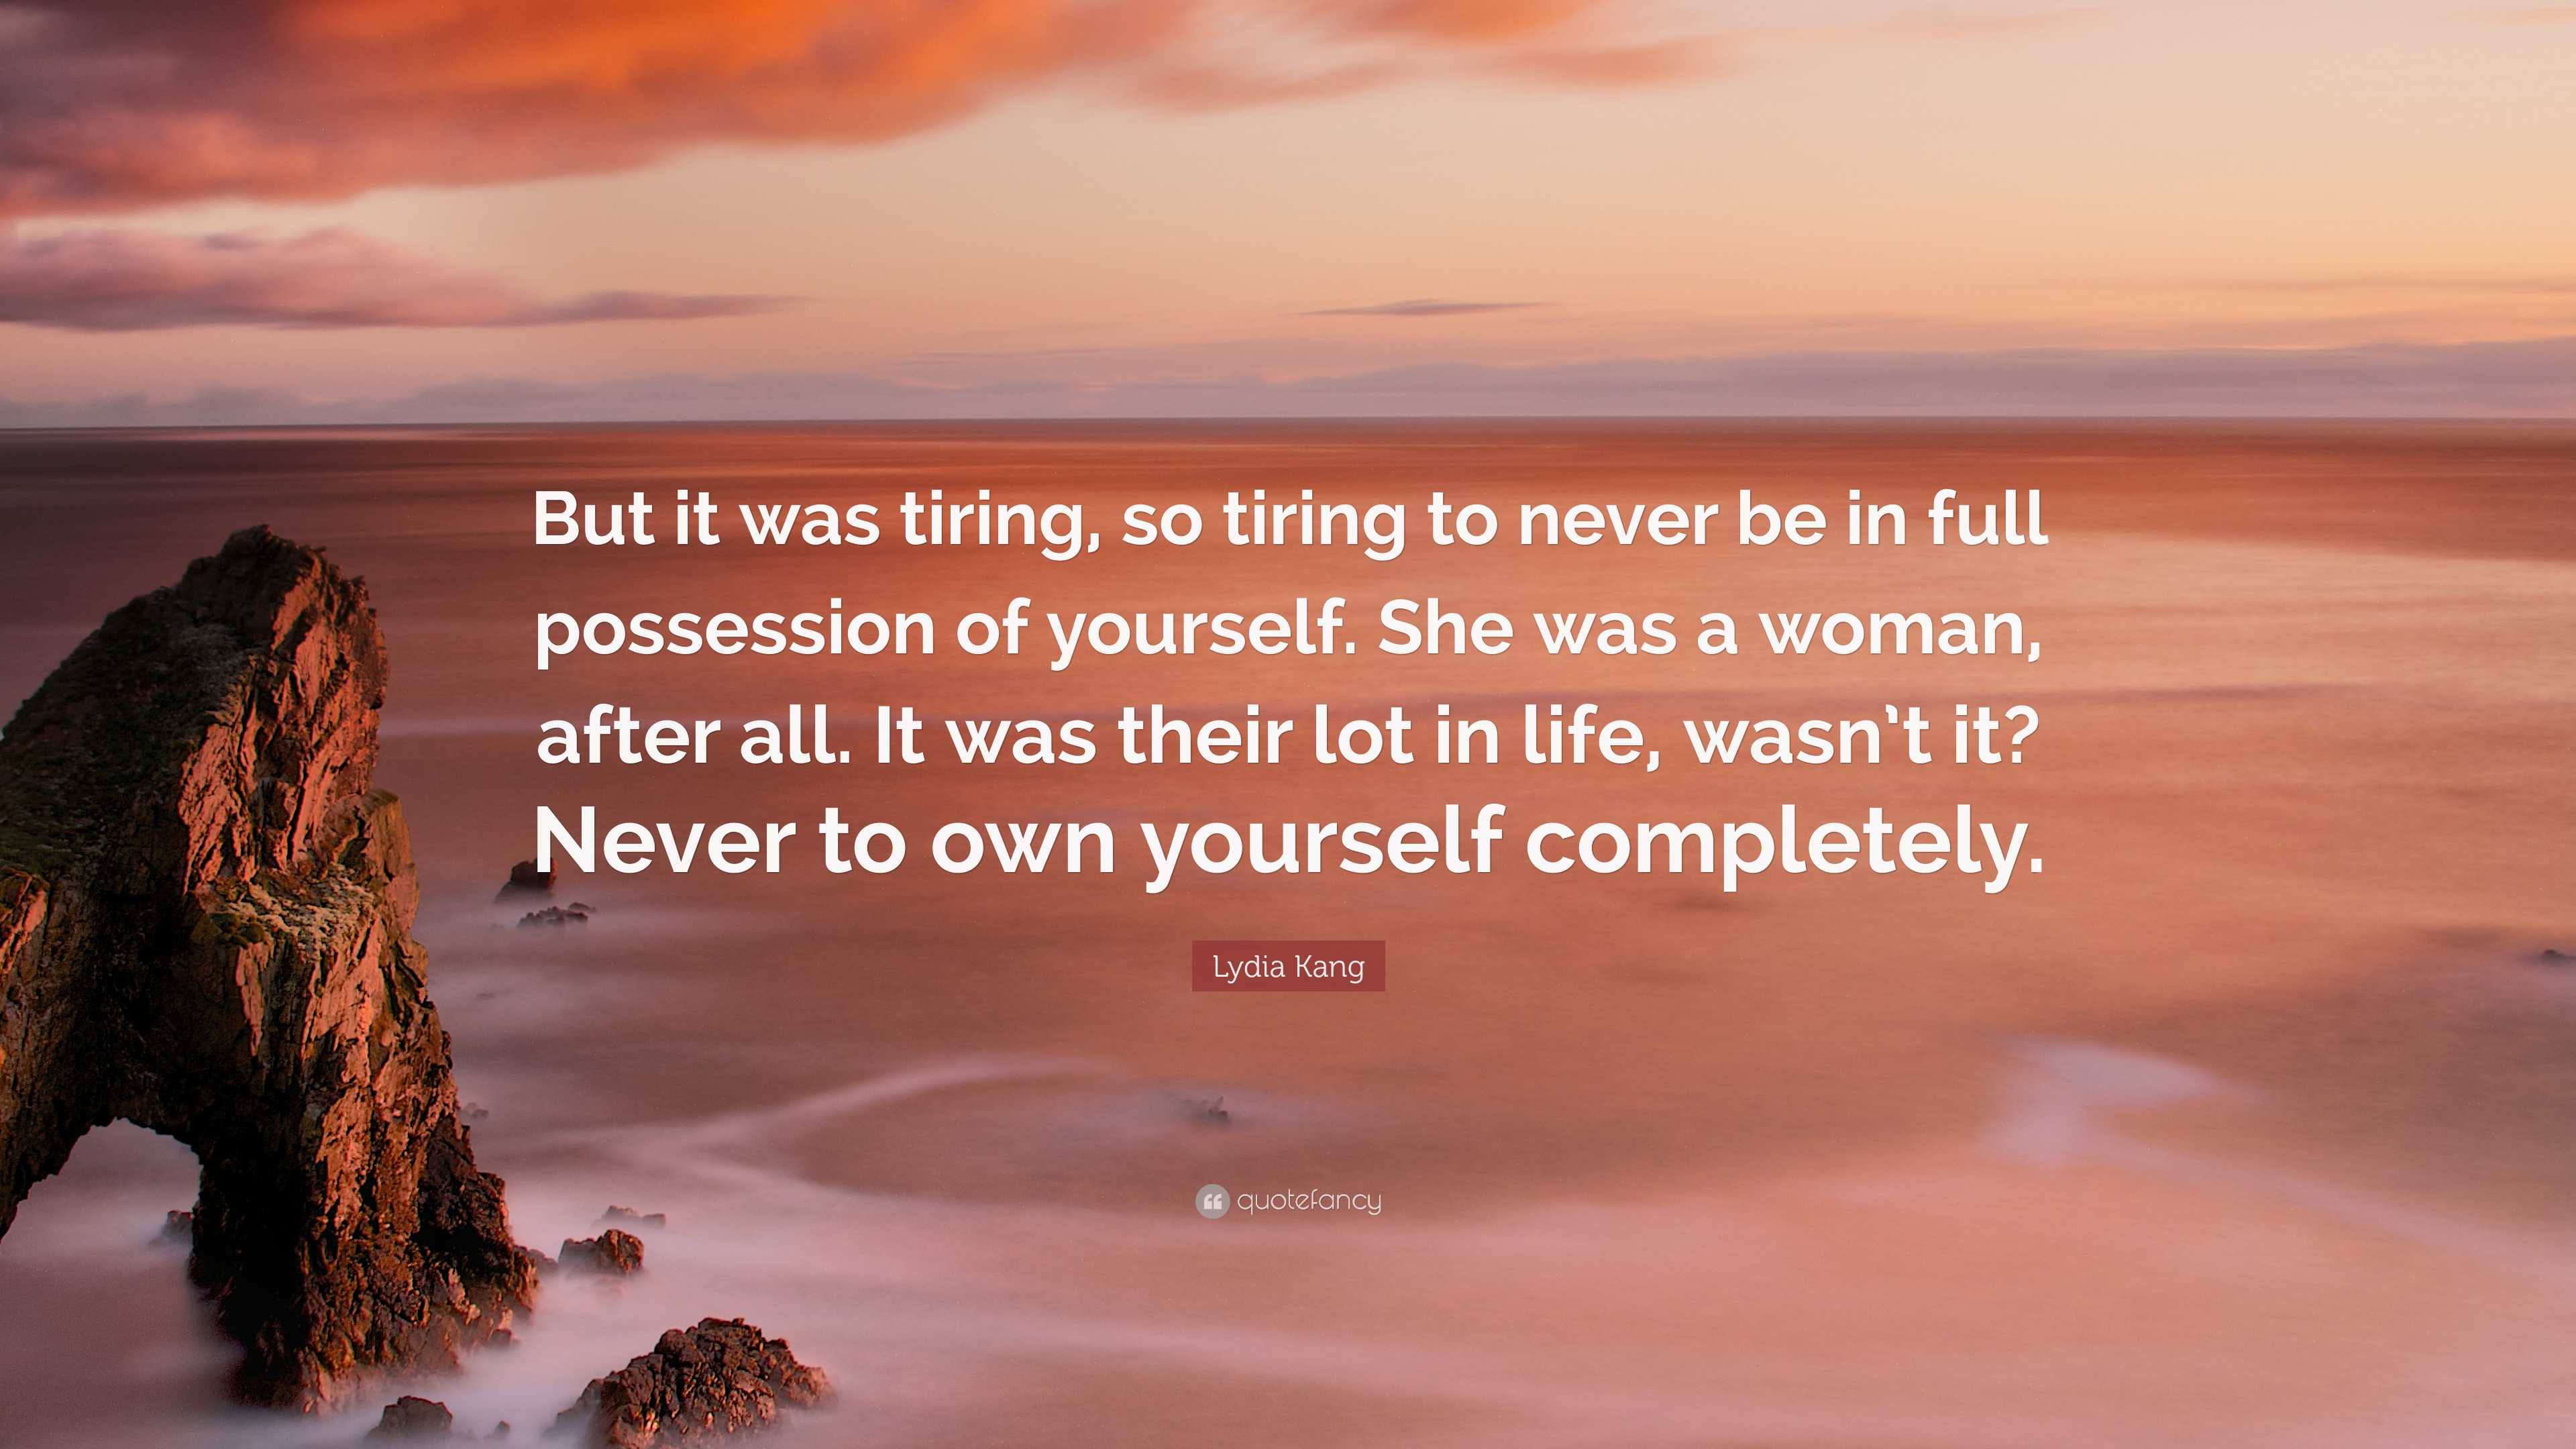 Lydia Kang Quote: “But it was tiring, so tiring to never be in full ...